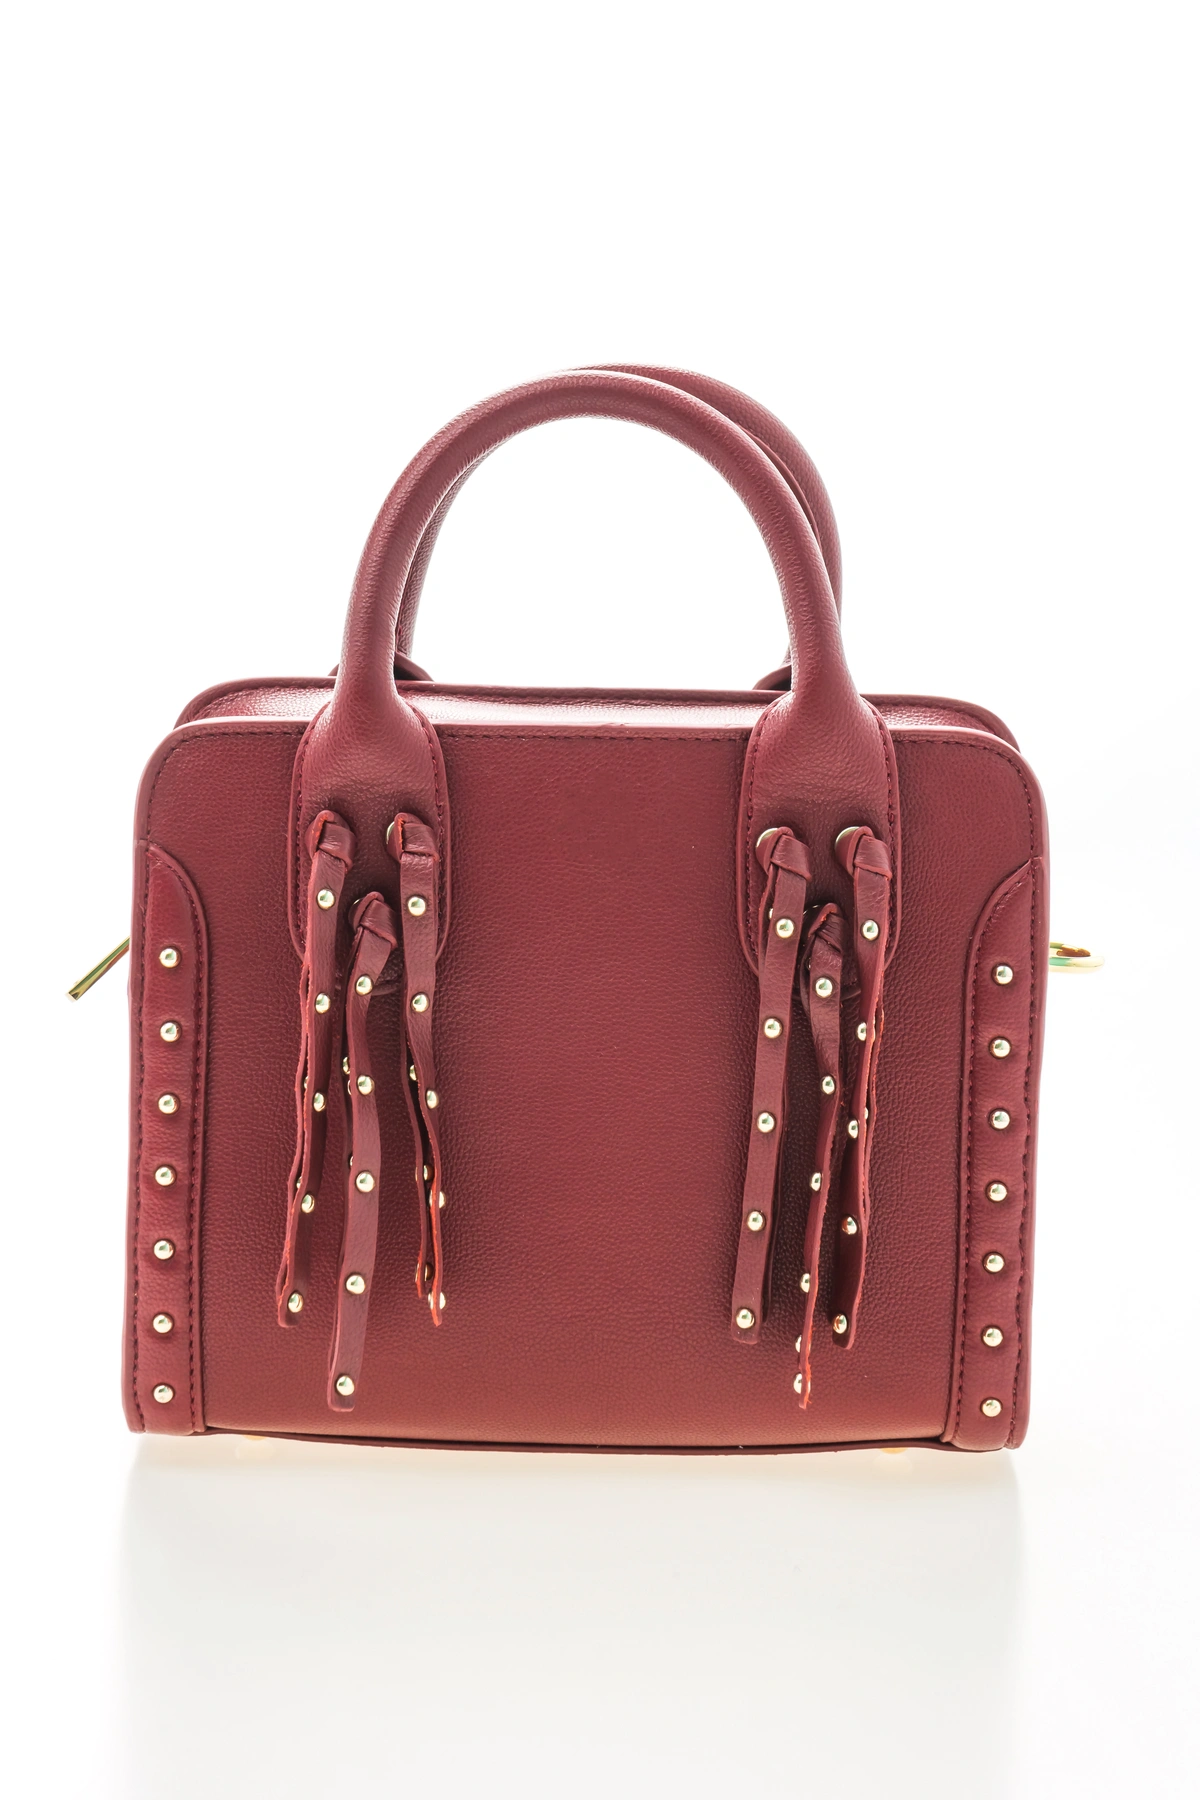 Red leather handbag with gold accents and a stylish design, perfect for a chic and trendy look